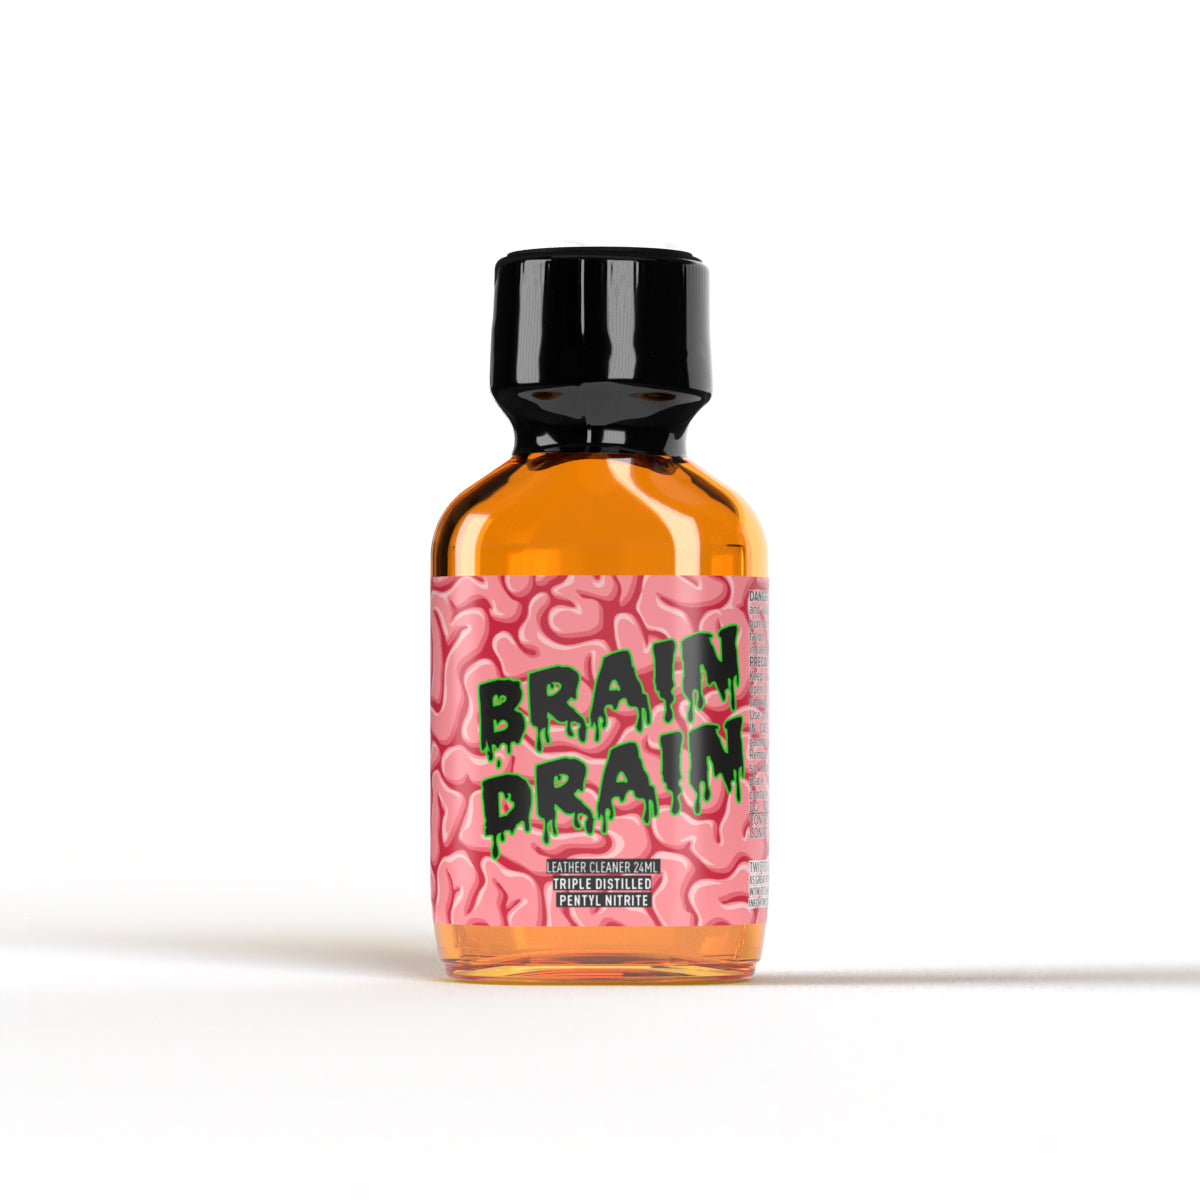 A product photo of a bottle of Brain Drain Poppers by Twisted Beast.